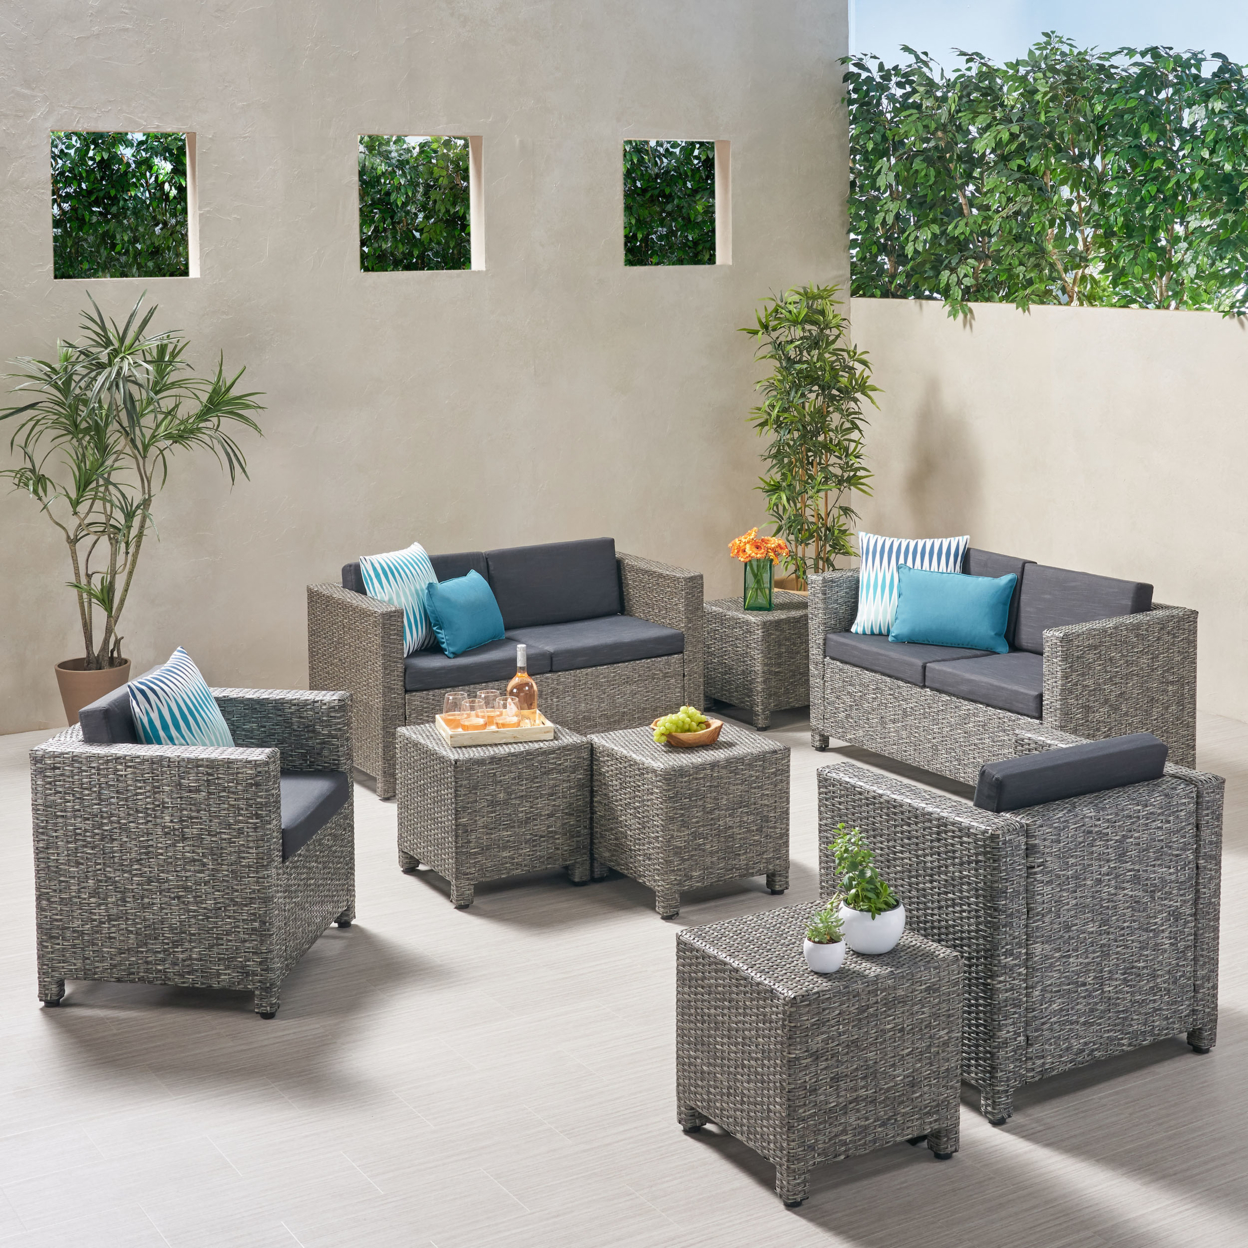 Gill Outdoor 6 Seater Wicker Chat Set With Side Tables - Mix Black + Dark Gray